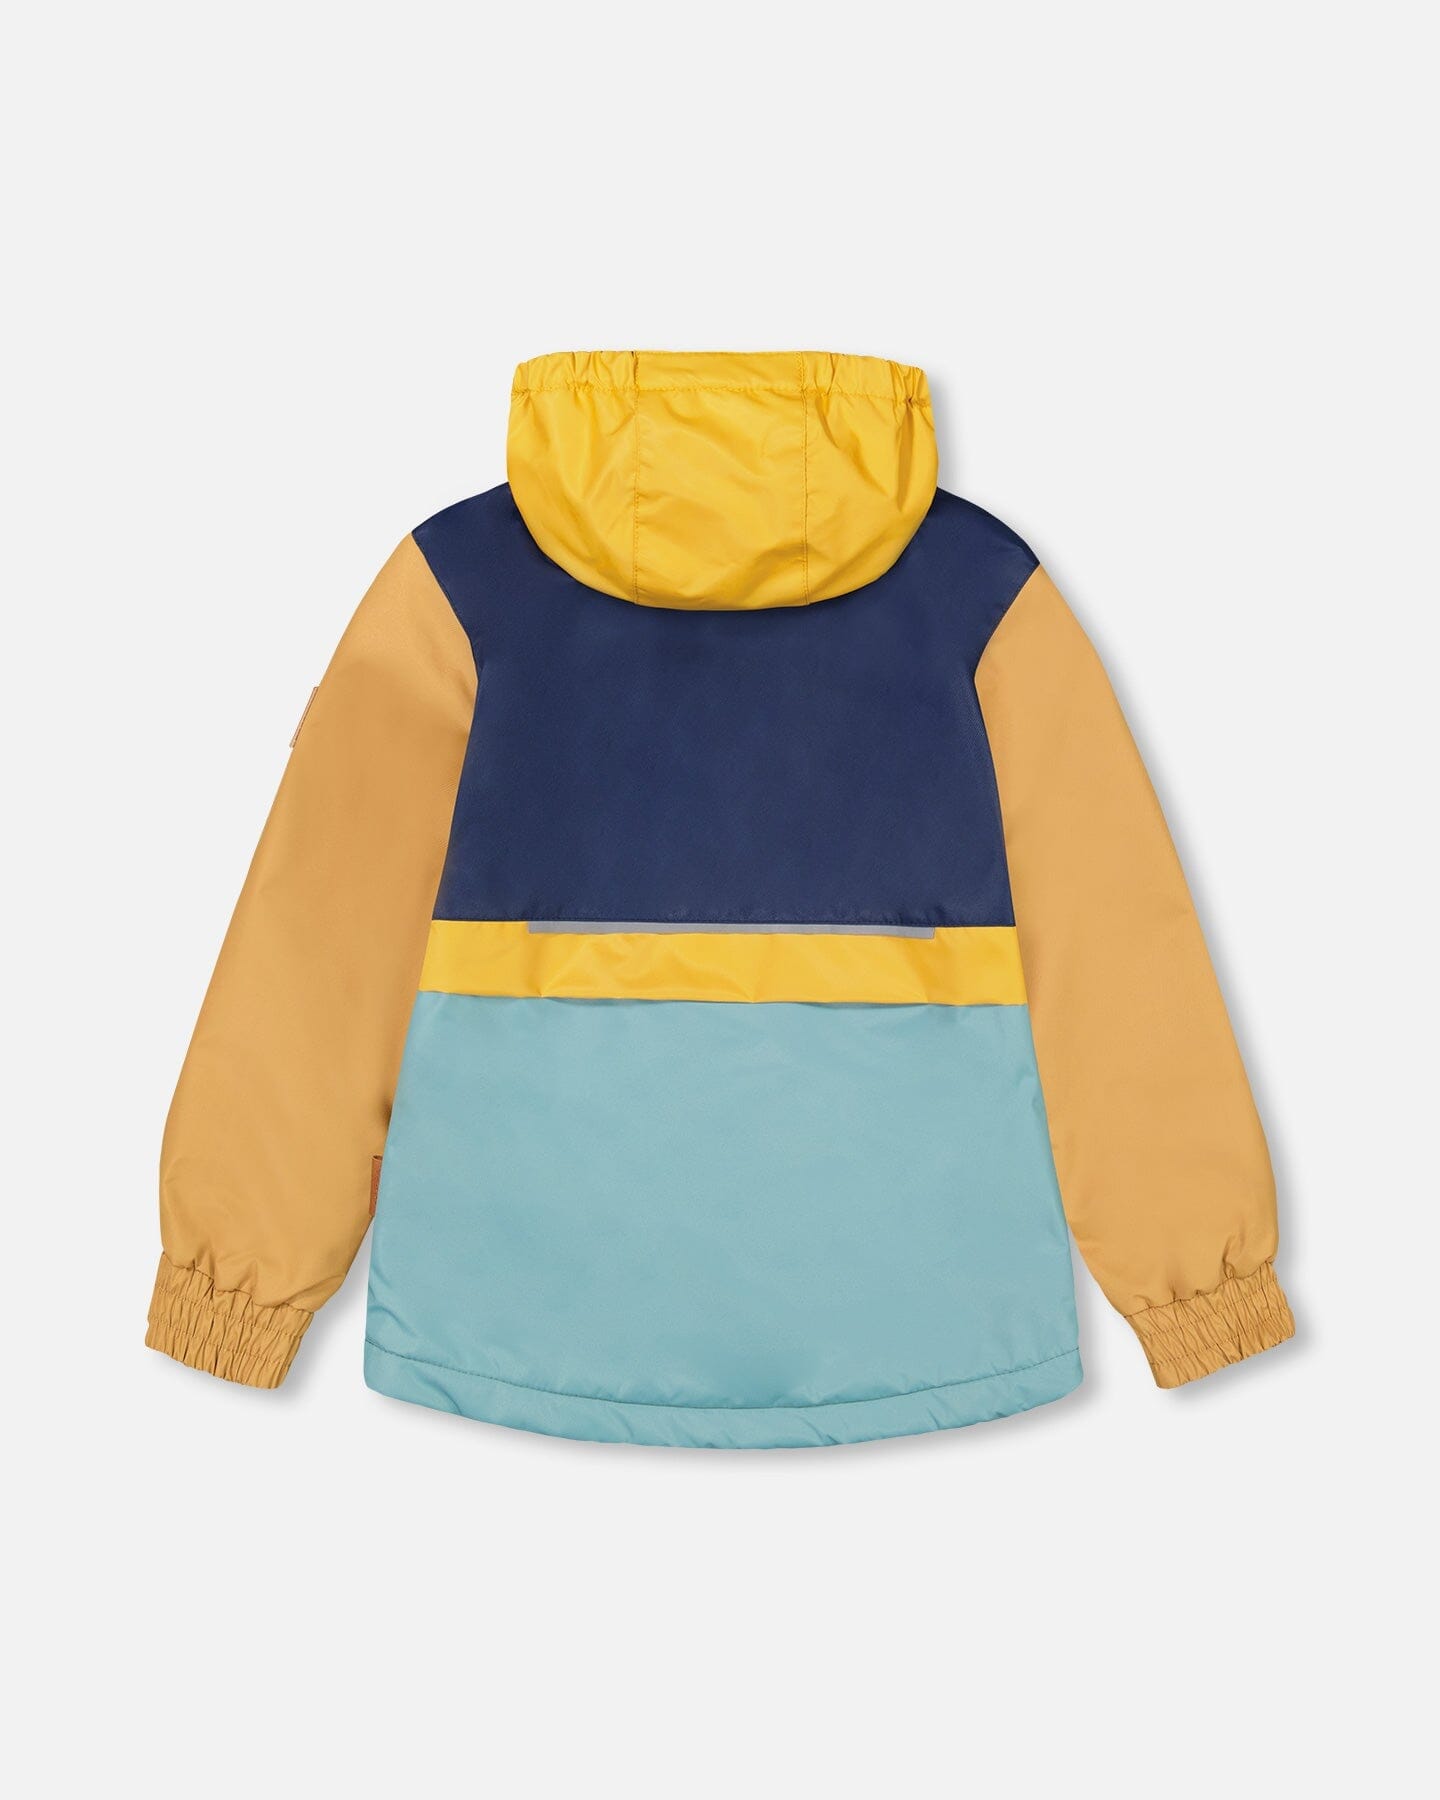 Two Piece Hooded Coat And Pant Mid-Season Set Colorblock Navy, Blue And Yellow - F30W54_479